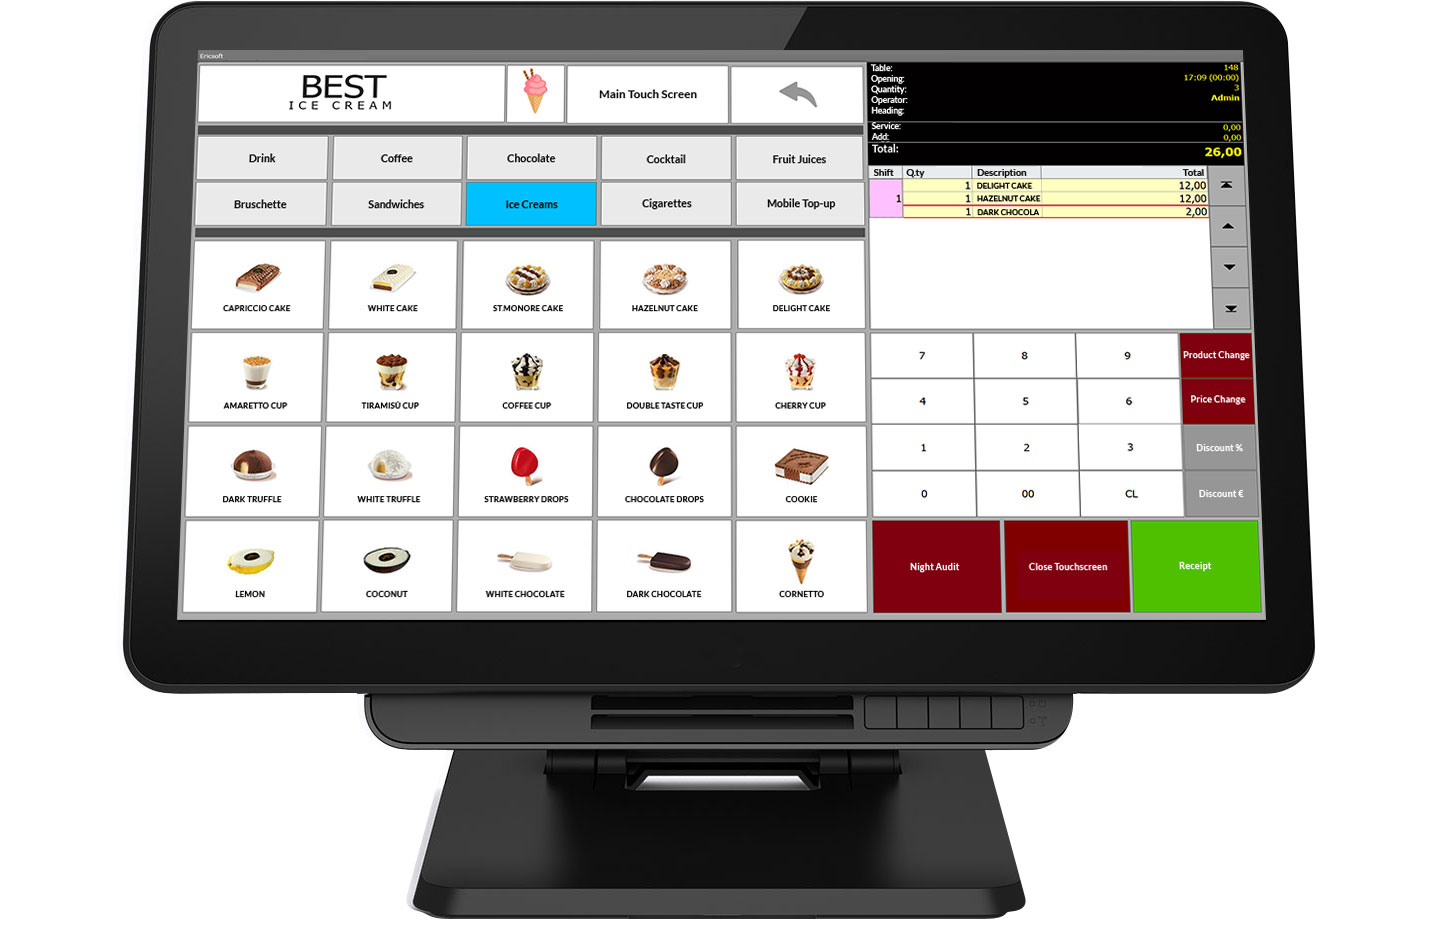 Point of sale software